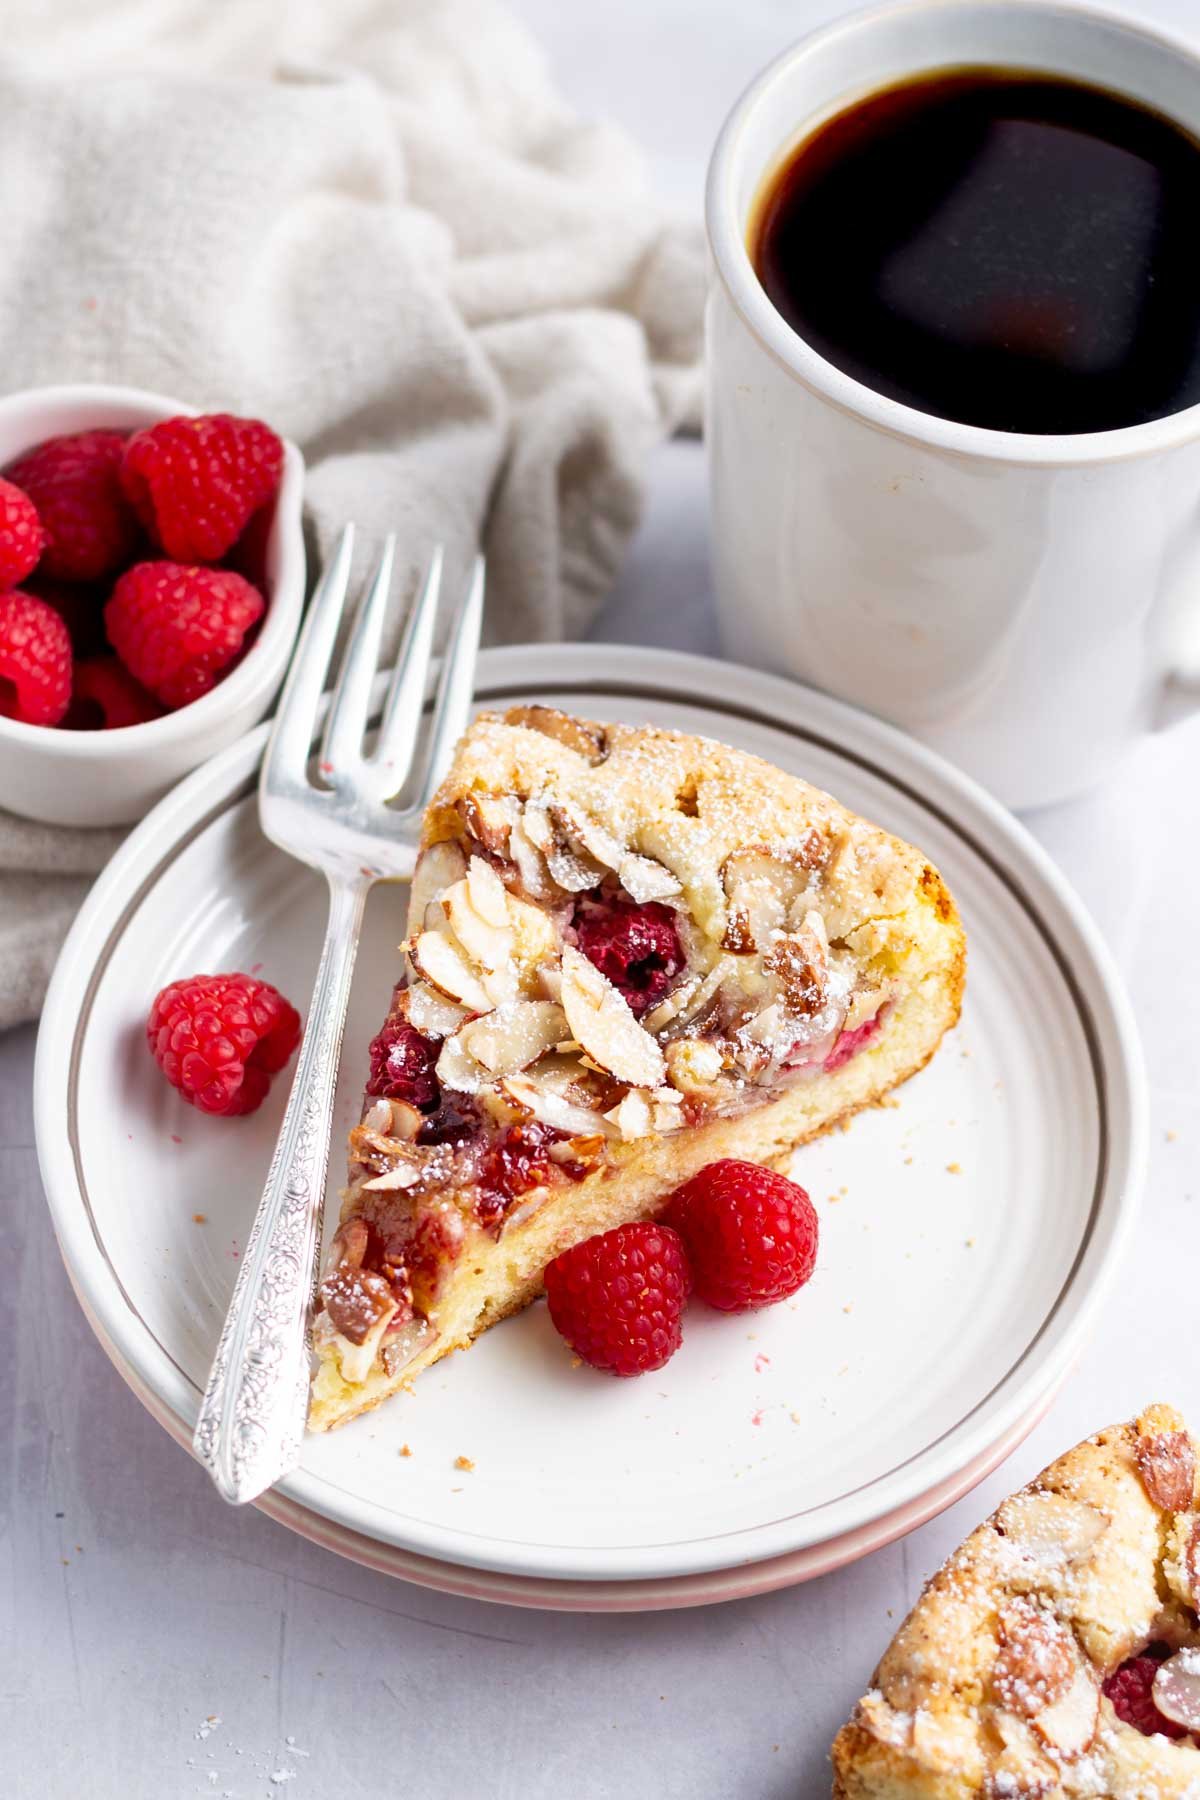 slice of raspberry almond cake on a plate with a fork and a cup of coffee